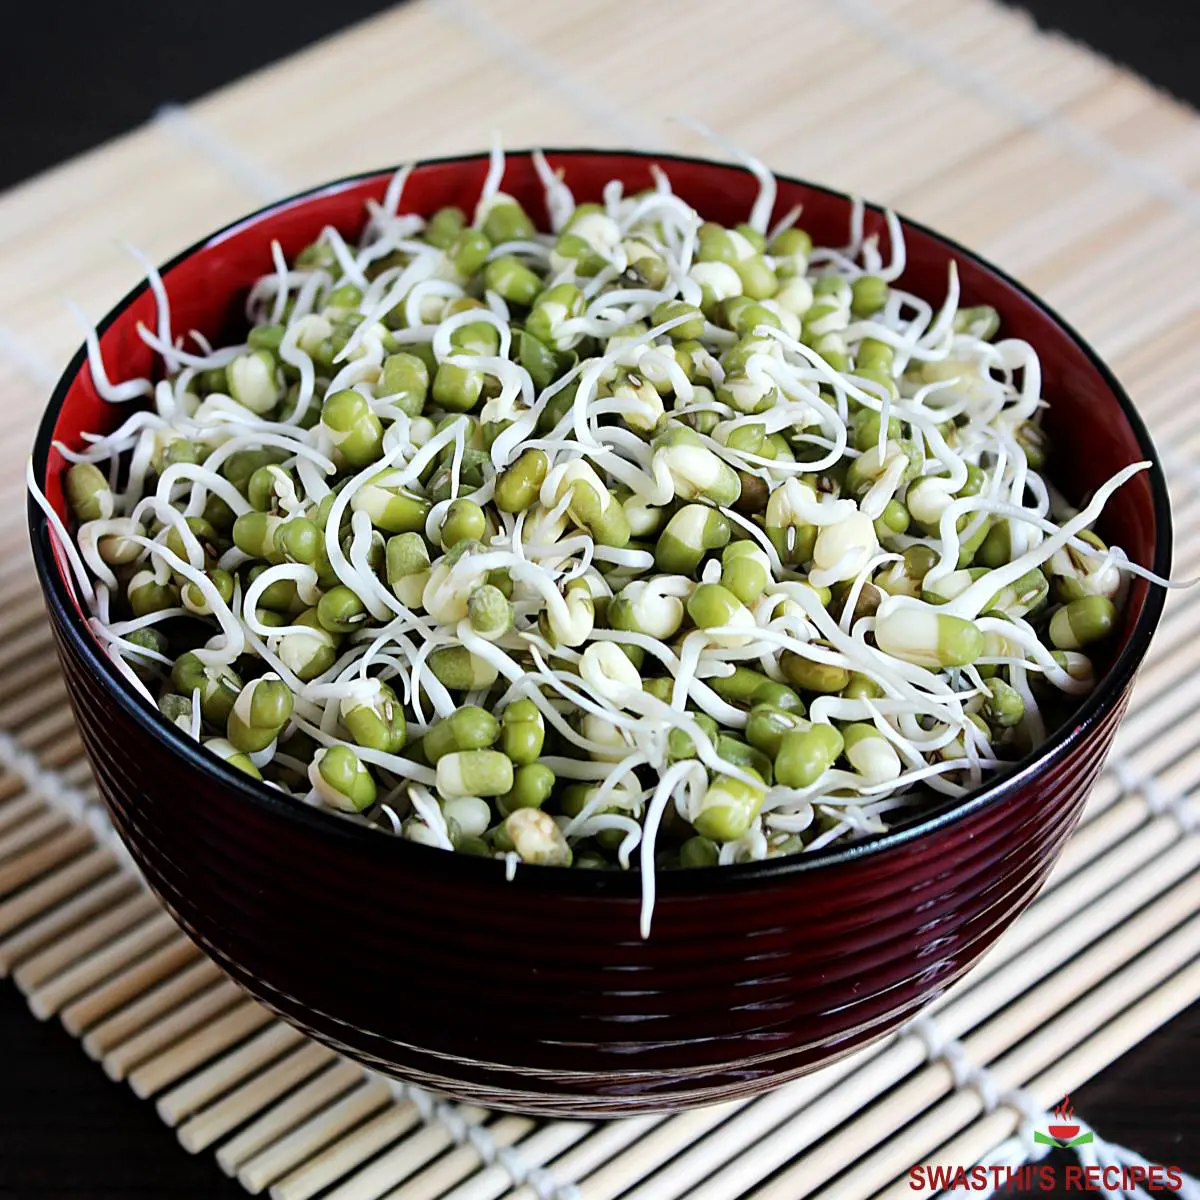 Mung bean sprouts in a red bowl